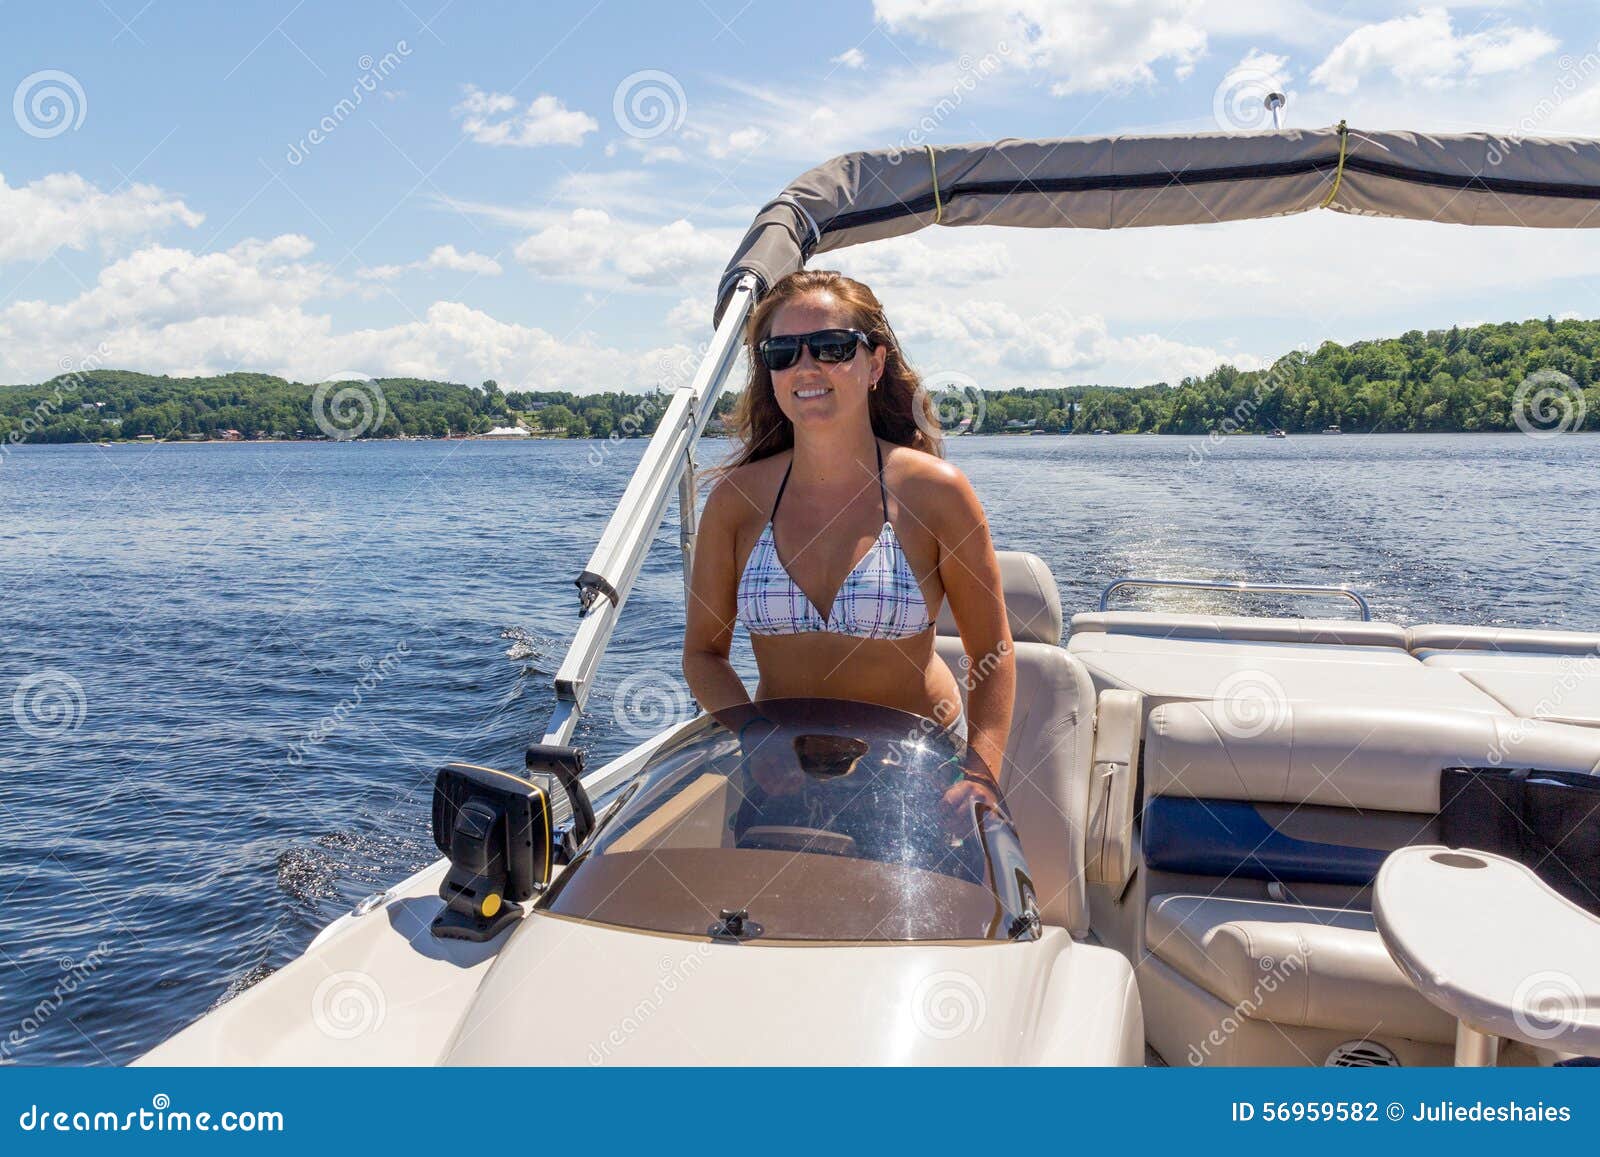 Women Driving A Pontoon Boat On A Lake Stock Photo - Image ...